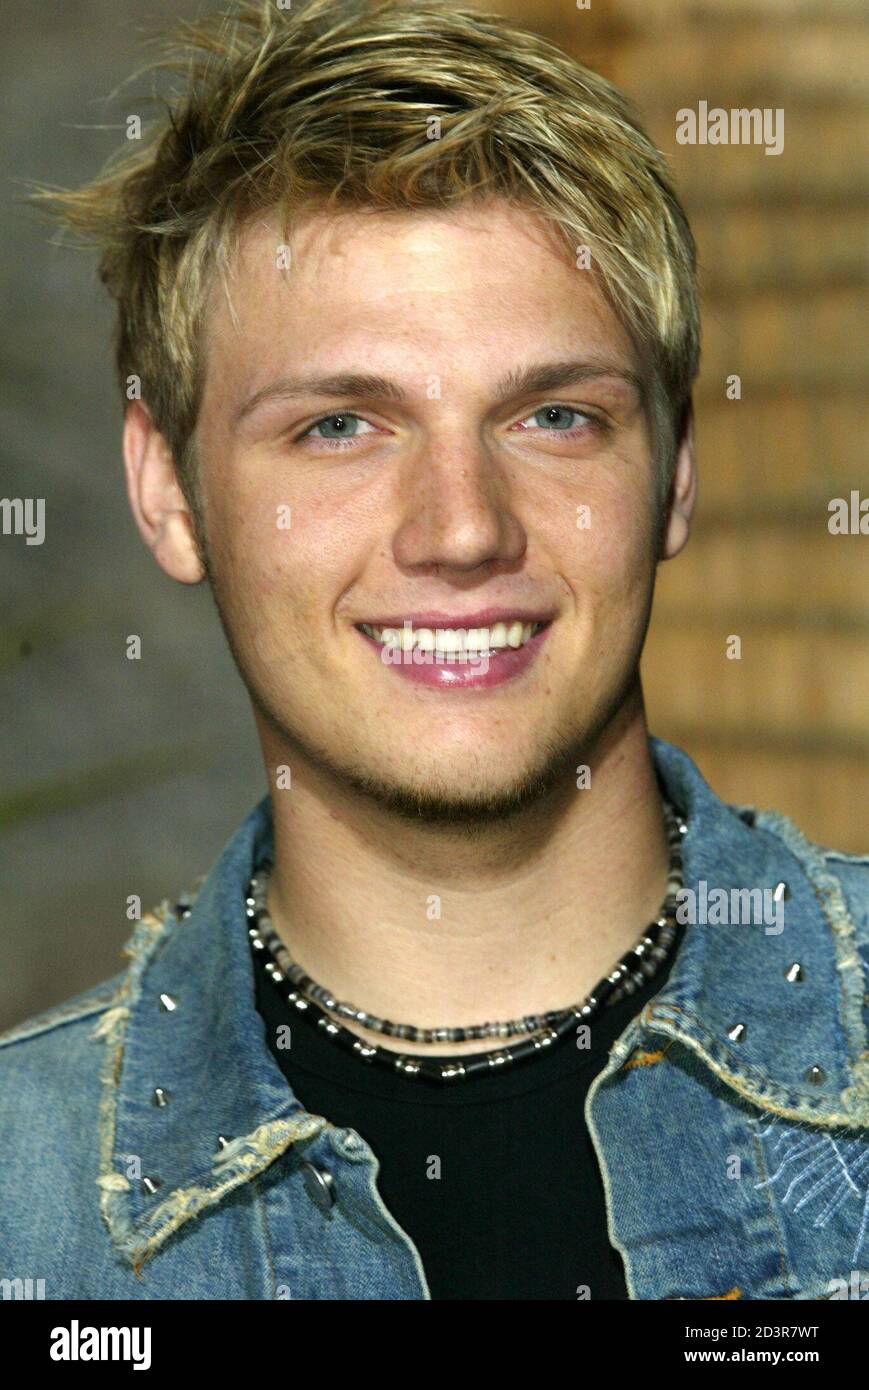 Nick Carter of the pop group Back Street Boys arrives at the 2002 Billboard Music Awards show at the MGM Grand Garden Arena in Las Vegas, Nevada, December 9, 2002. Stock Photo